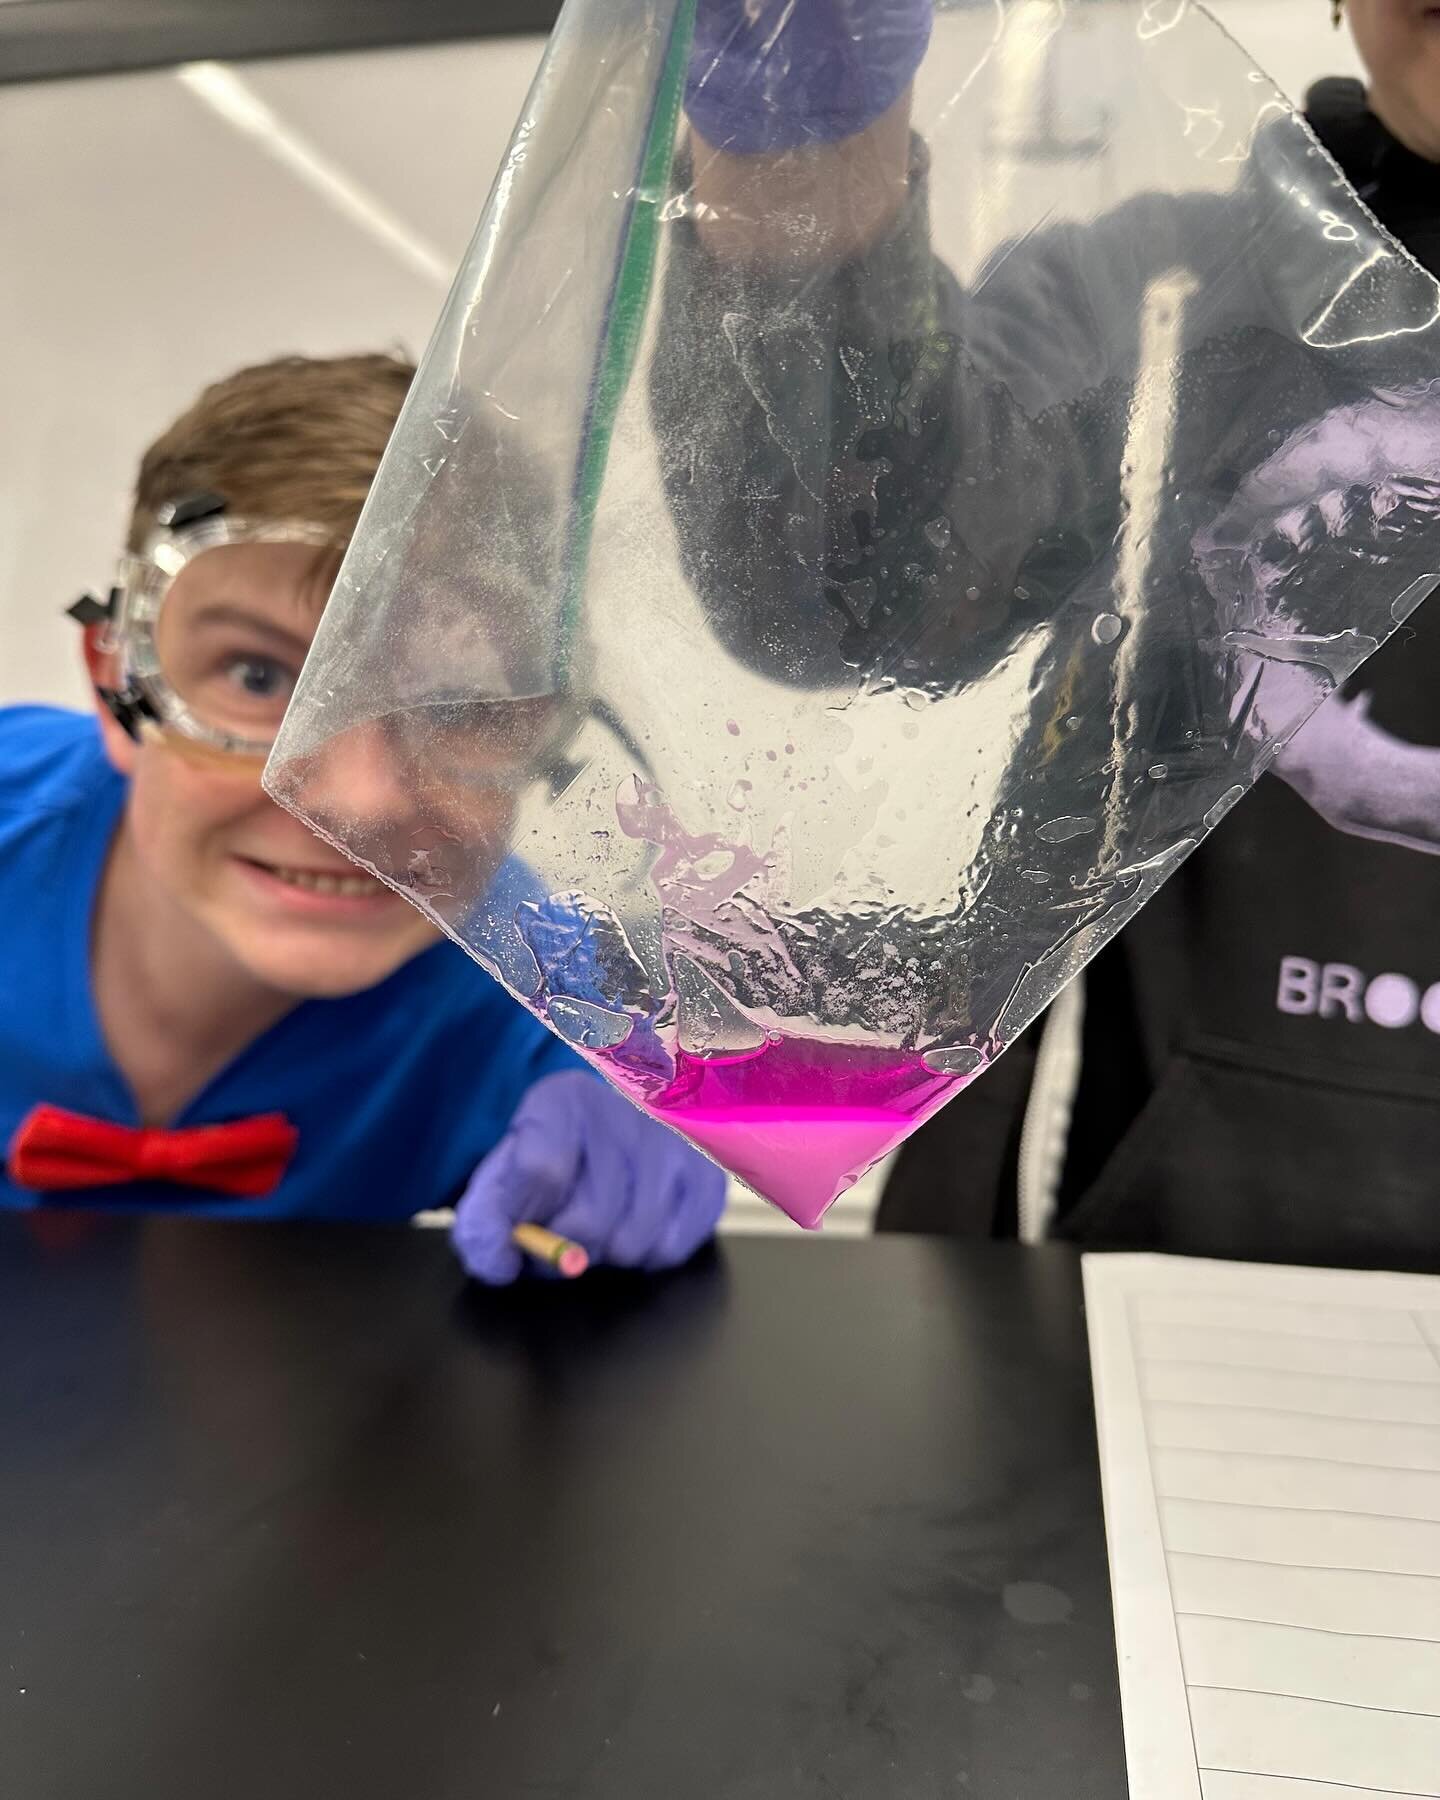 Chemistry students began a new unit on reactions today where open-ended inquiry in the lab brought focused attention to the evidence we use to identify that chemical reactions have occurred. #inquiry #chemistry #science #lab #sciencelab #highschool #